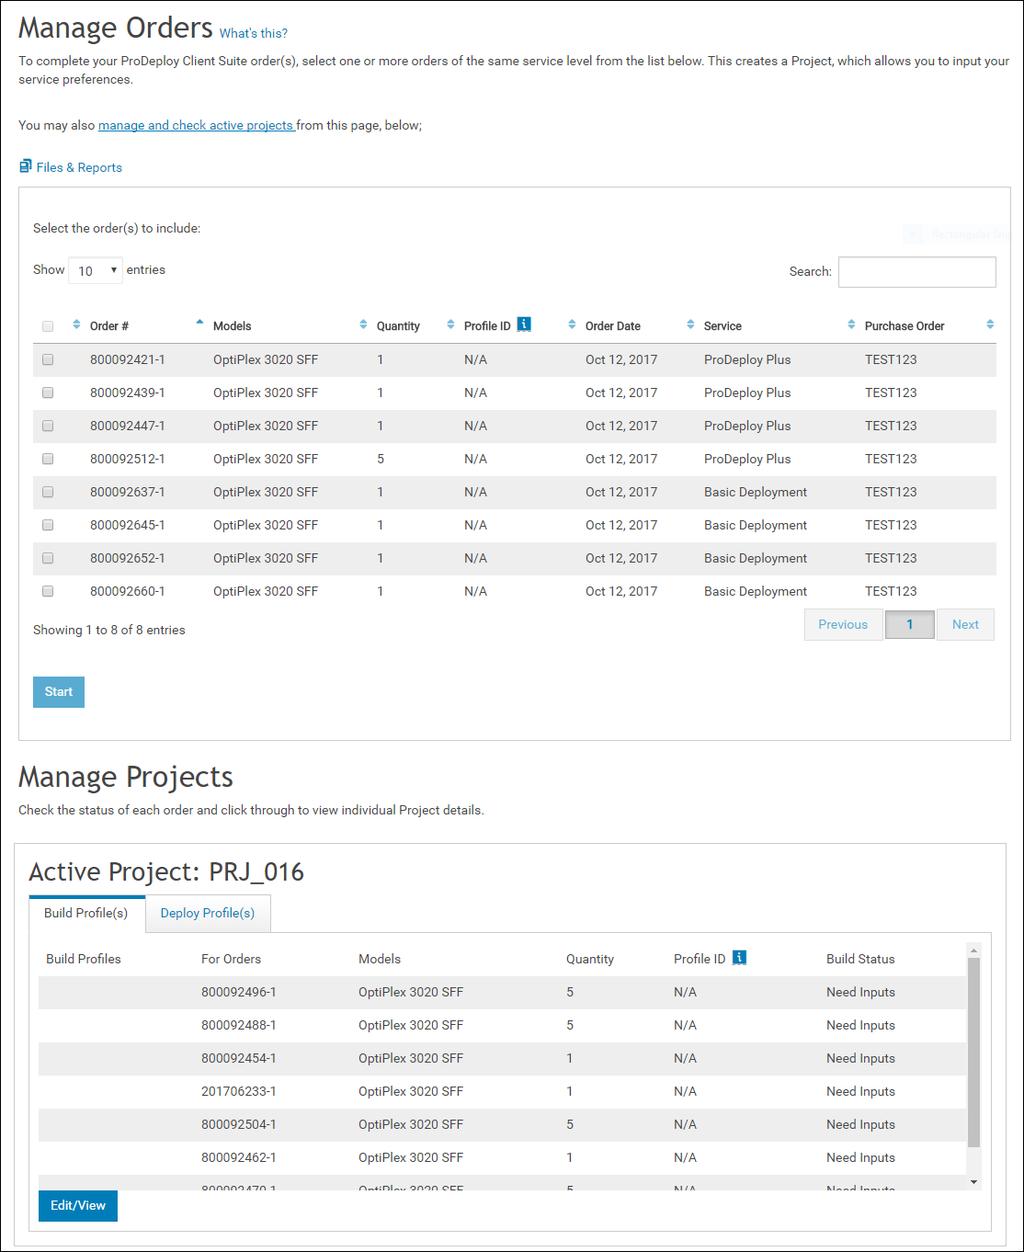 4 Manage Orders page The Manage Orders page includes the following sections: Manage Orders Lists the orders that have not been assigned to a Project.